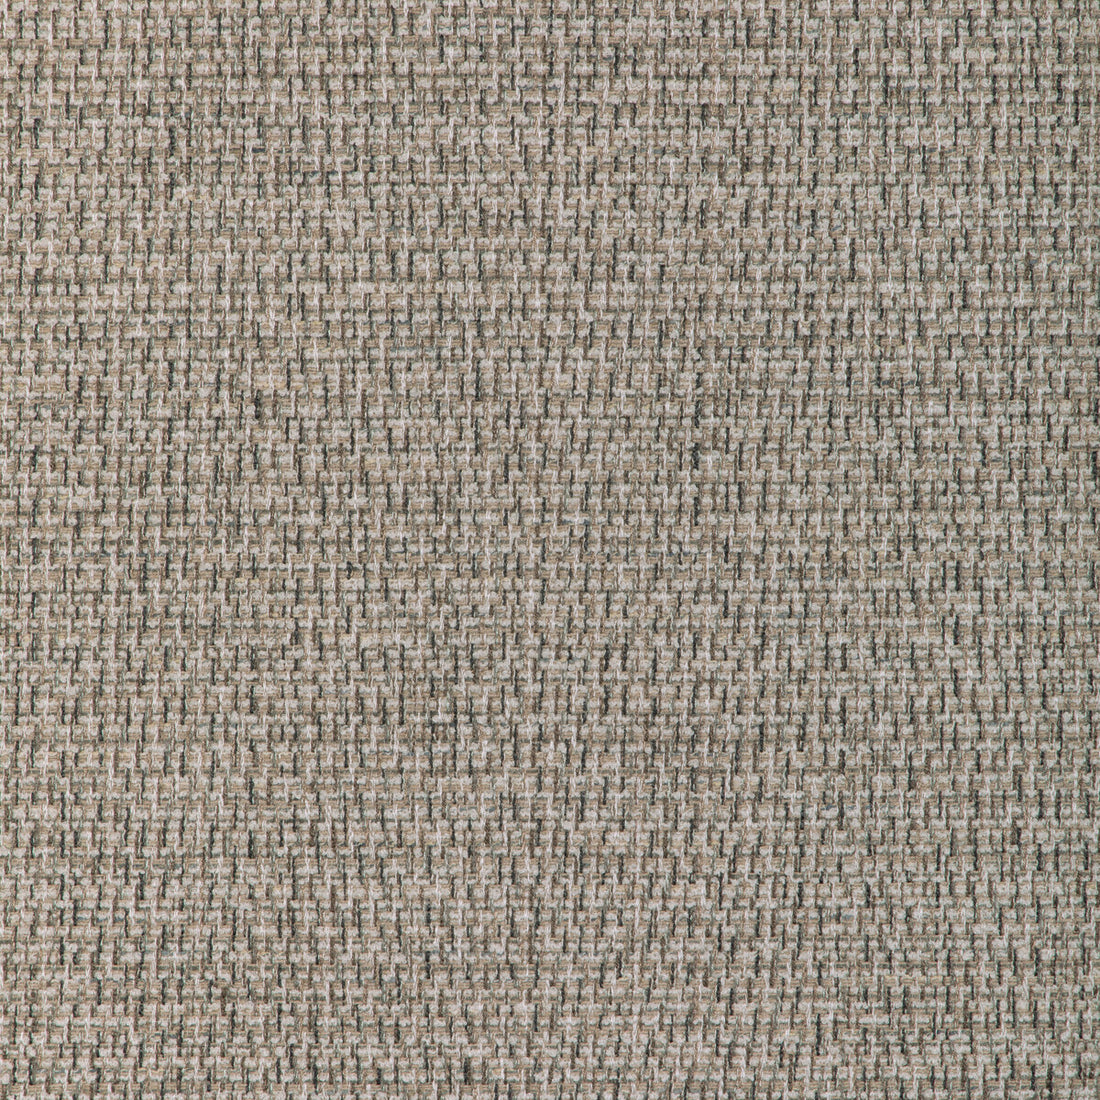 Diderot Texture fabric in stone color - pattern 8023132.1611.0 - by Brunschwig &amp; Fils in the Arles Weaves collection